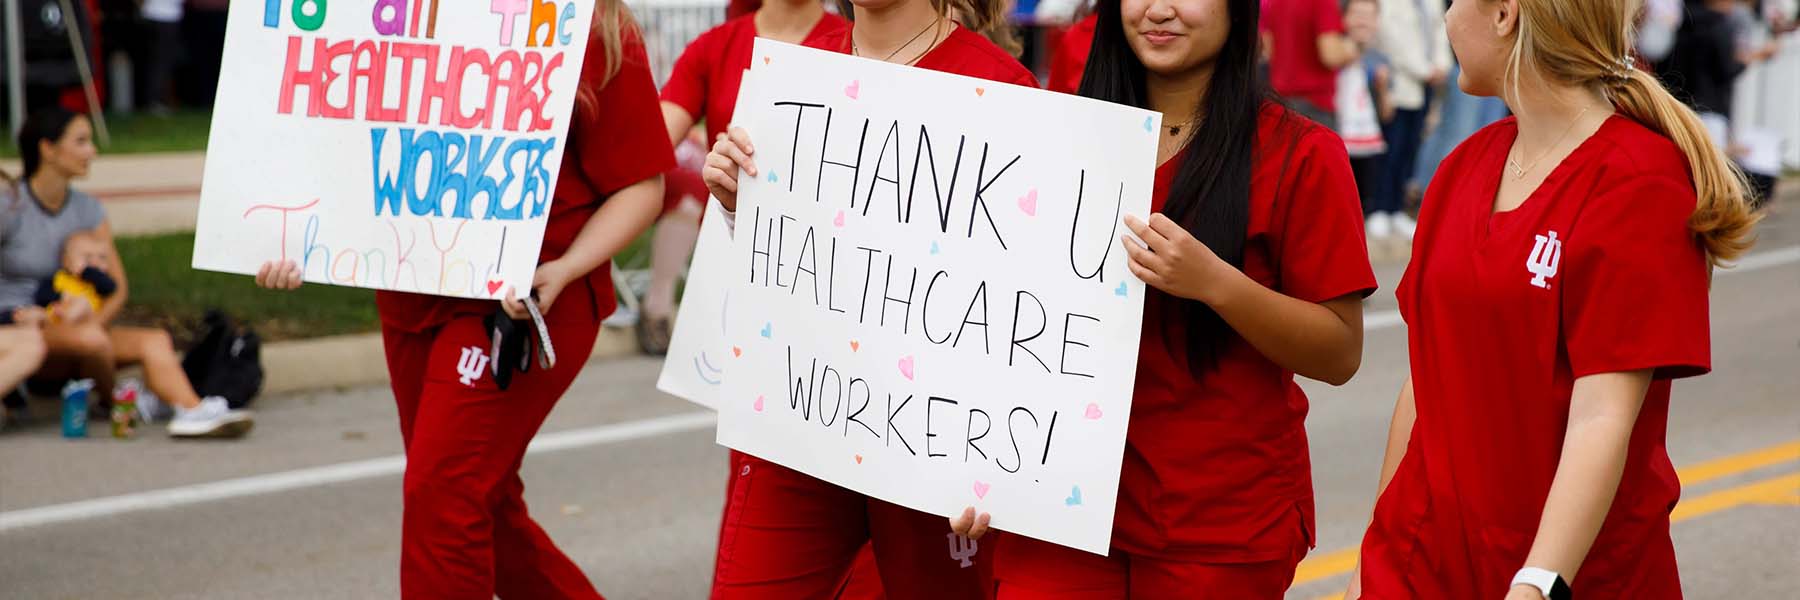 Thank you healthcare workers sign